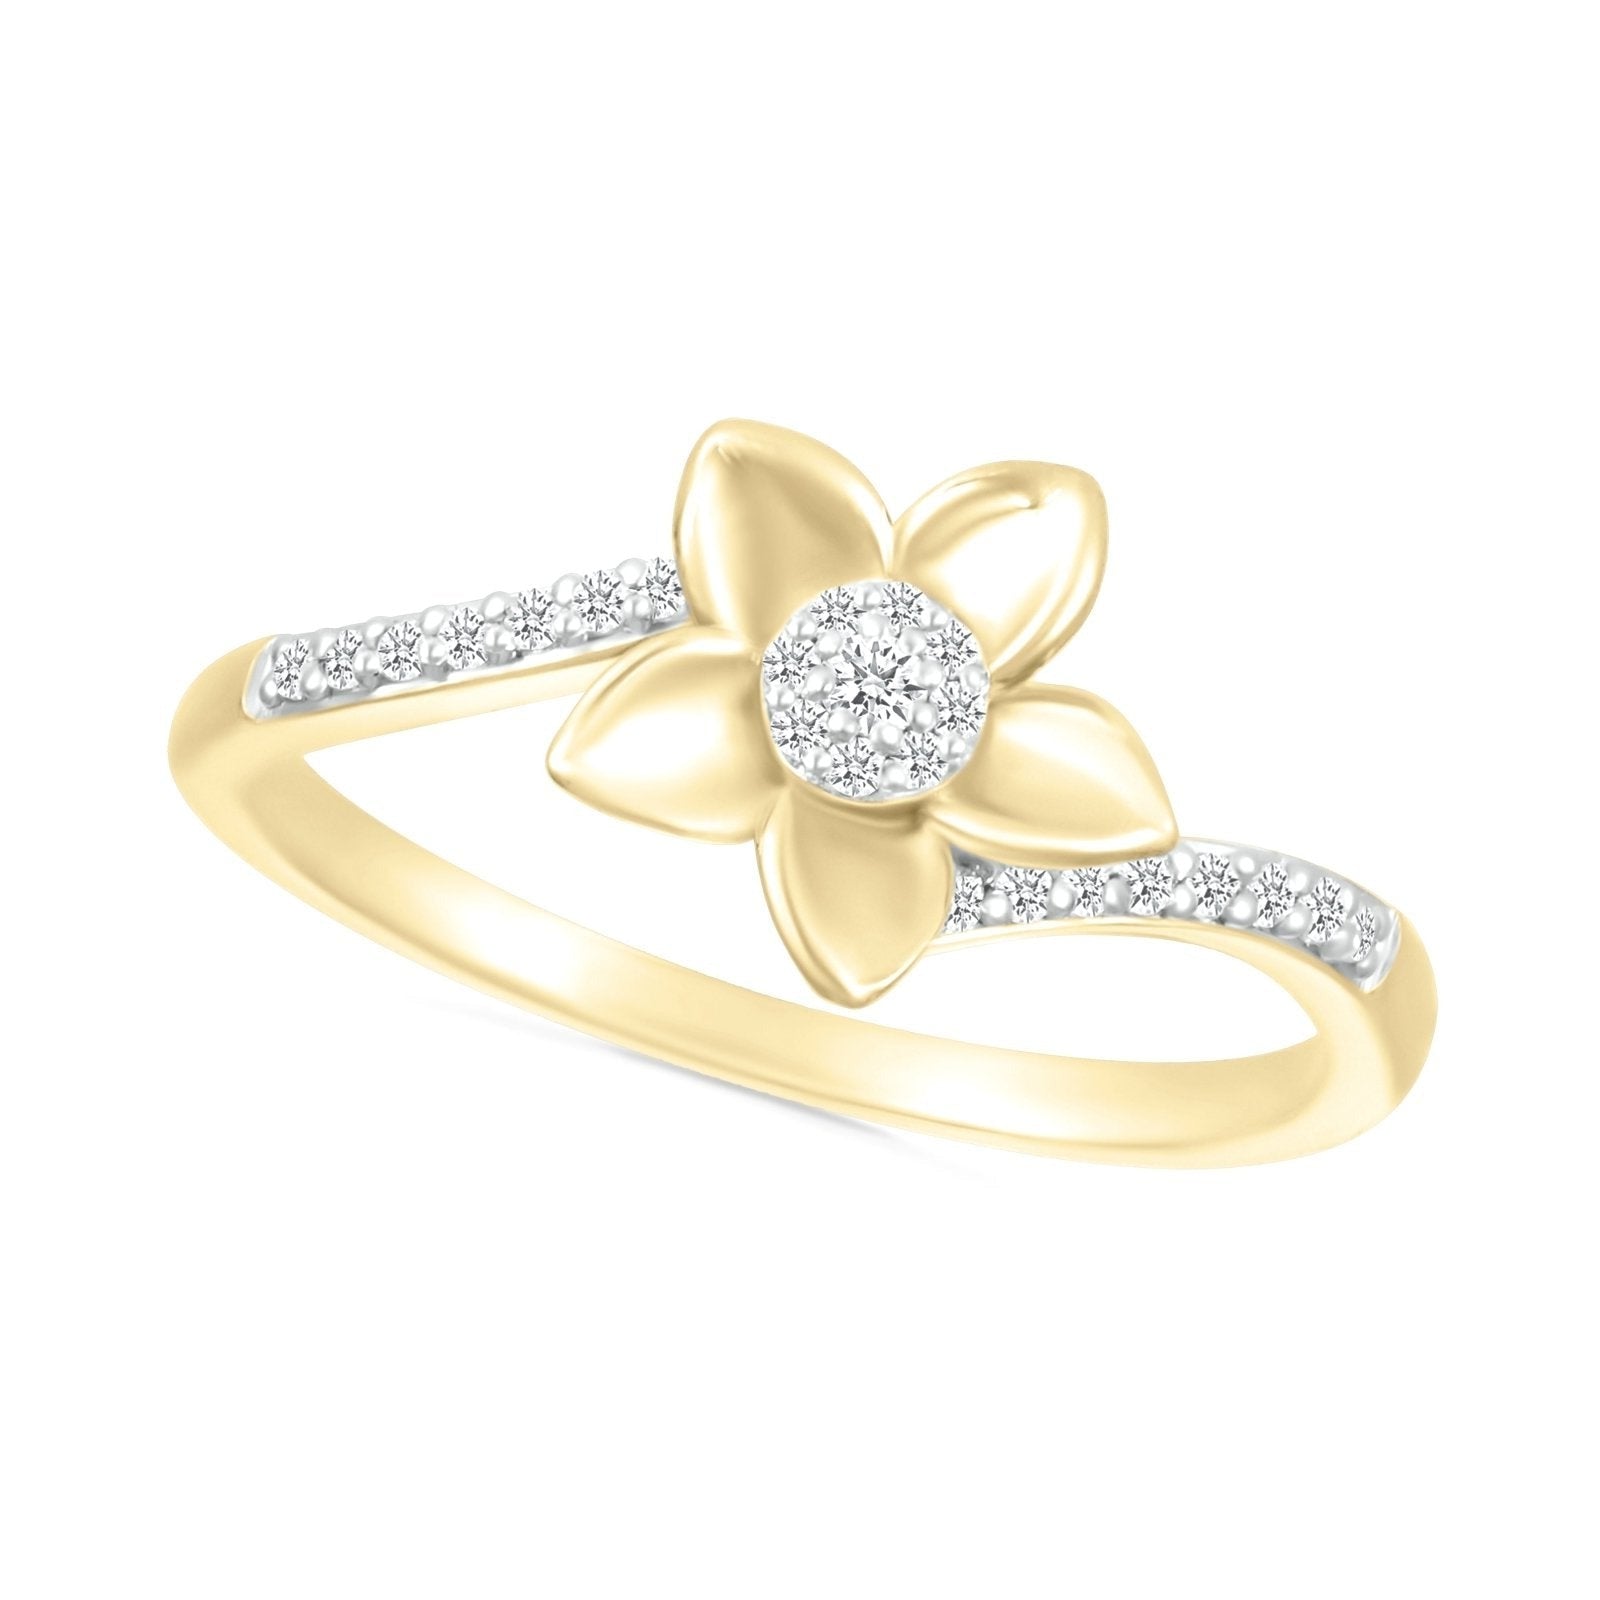 Daisy Ring with Diamond Center and Band Rings Estella Collection #product_description# 32761 10k April Birthstone Colorless Gemstone #tag4# #tag5# #tag6# #tag7# #tag8# #tag9# #tag10#